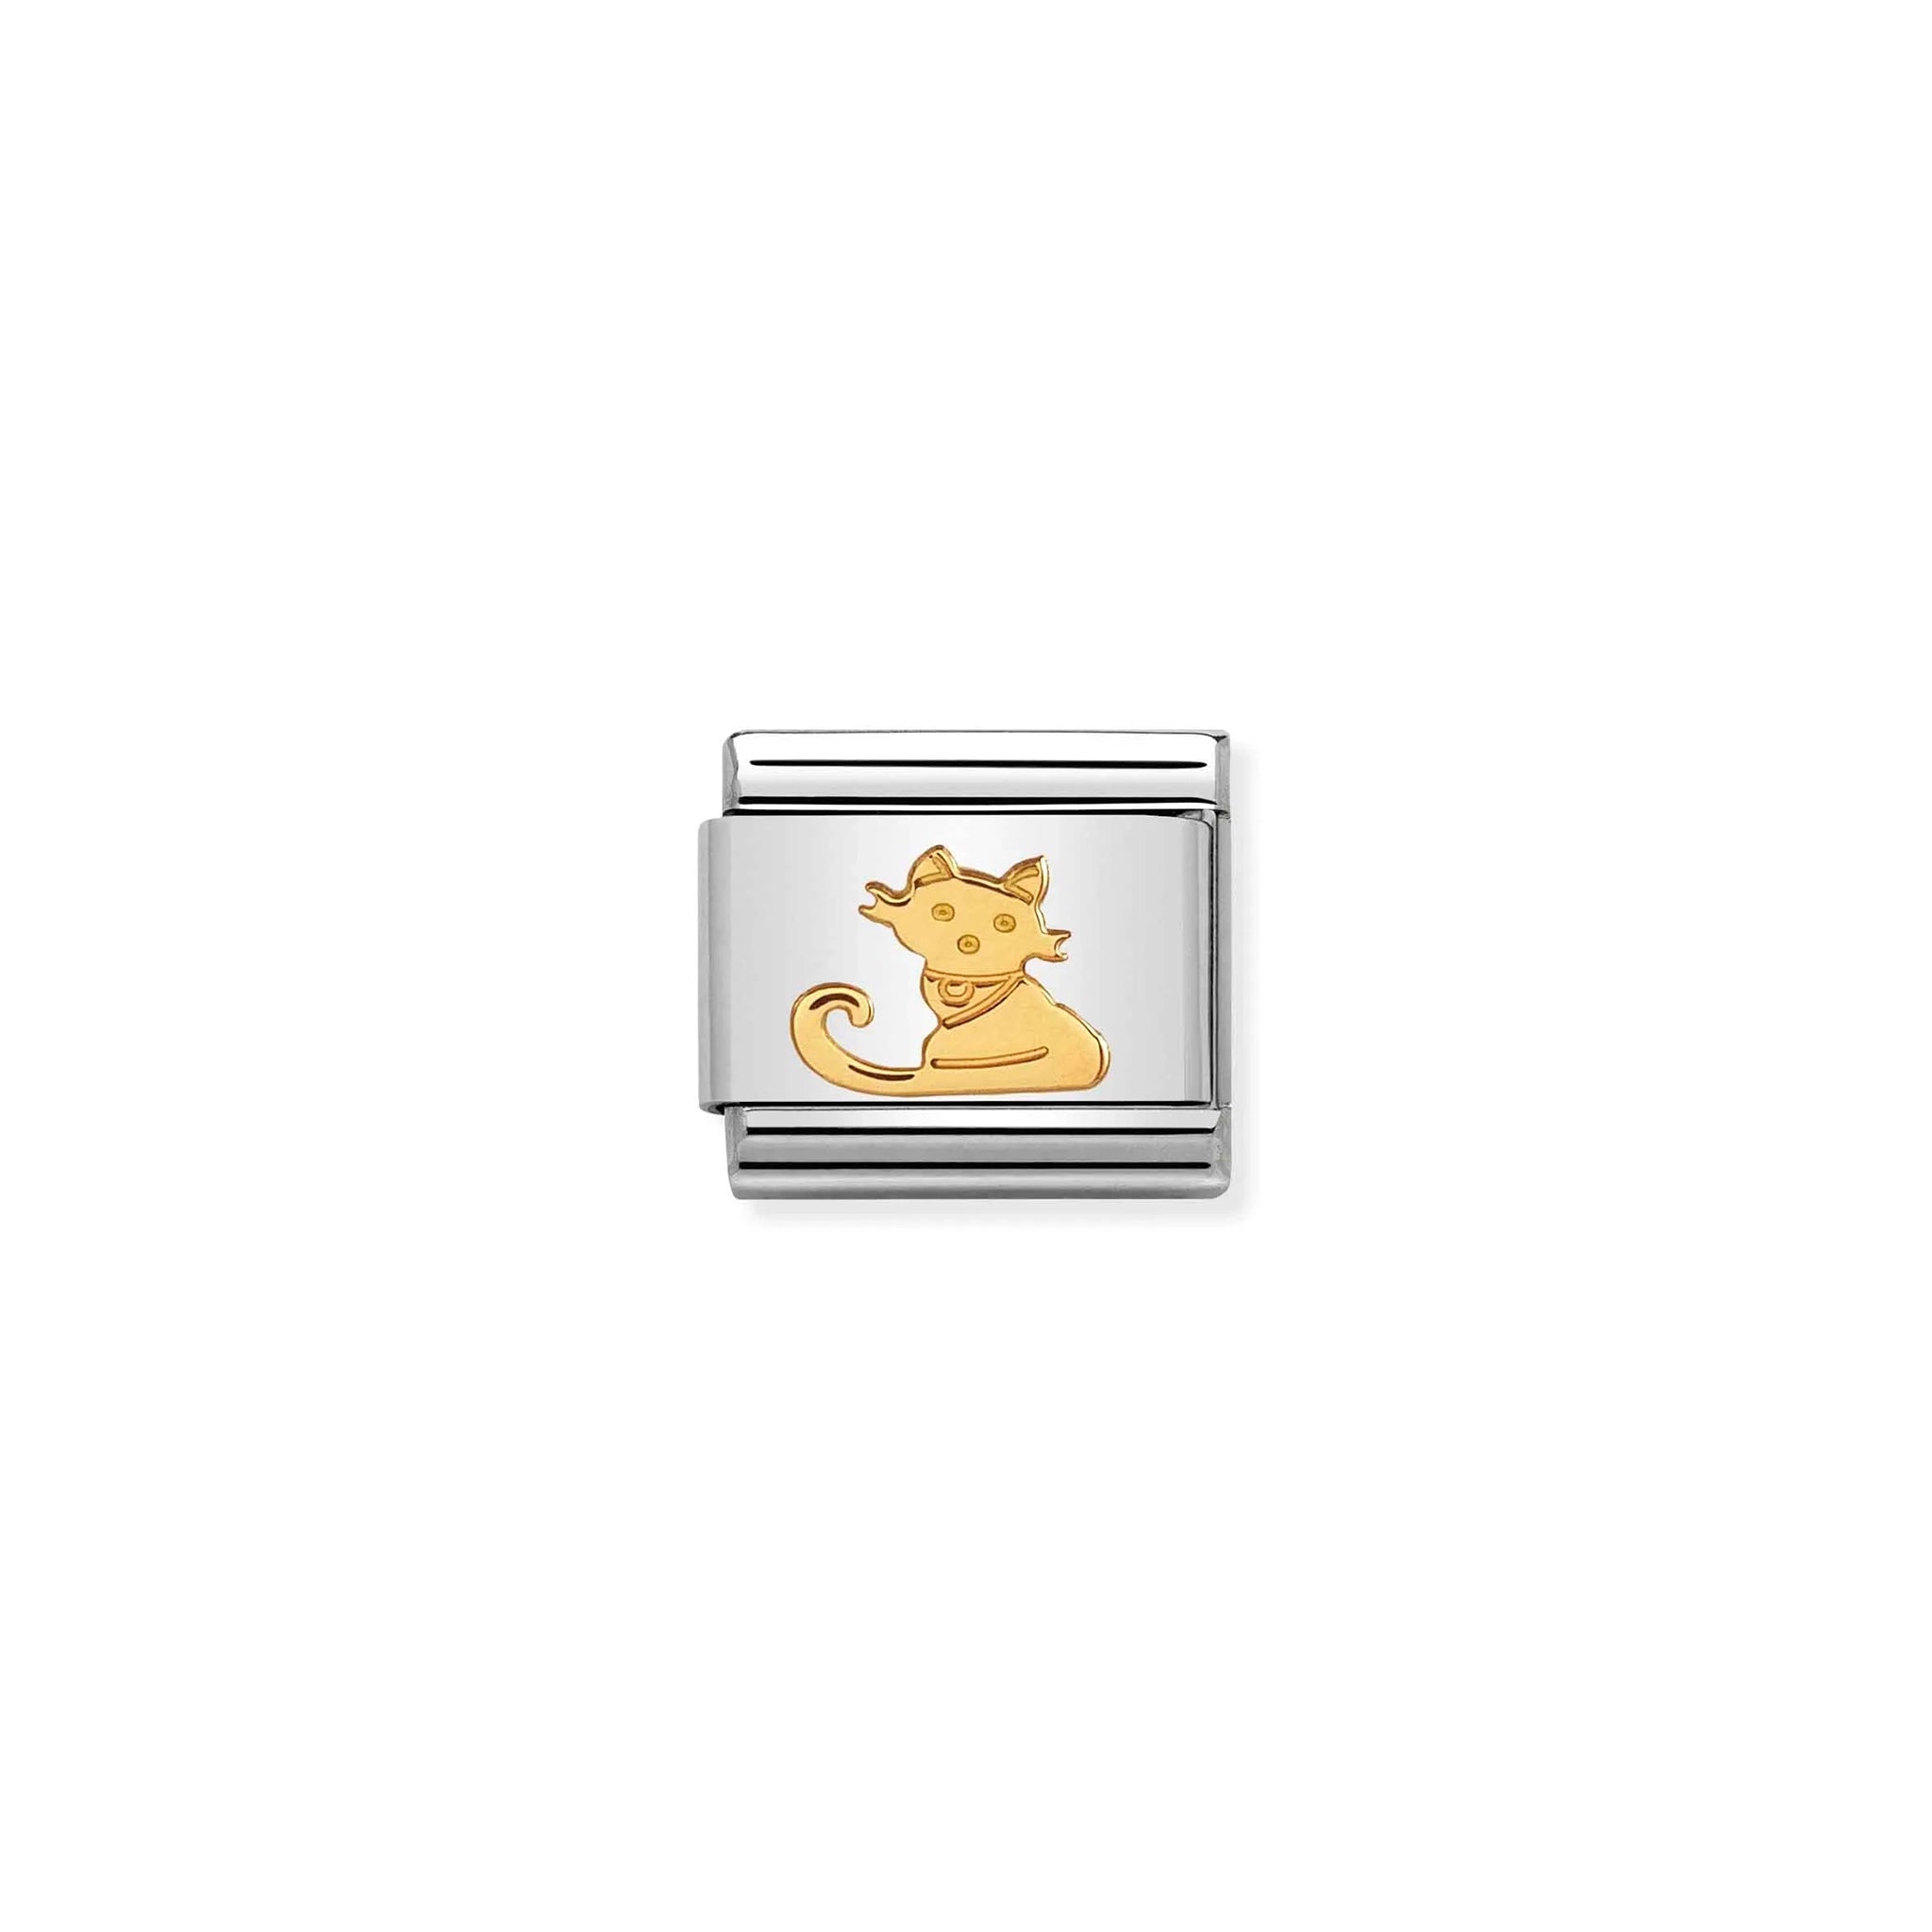 A Nomination charm link featuring a plain gold sitting cat